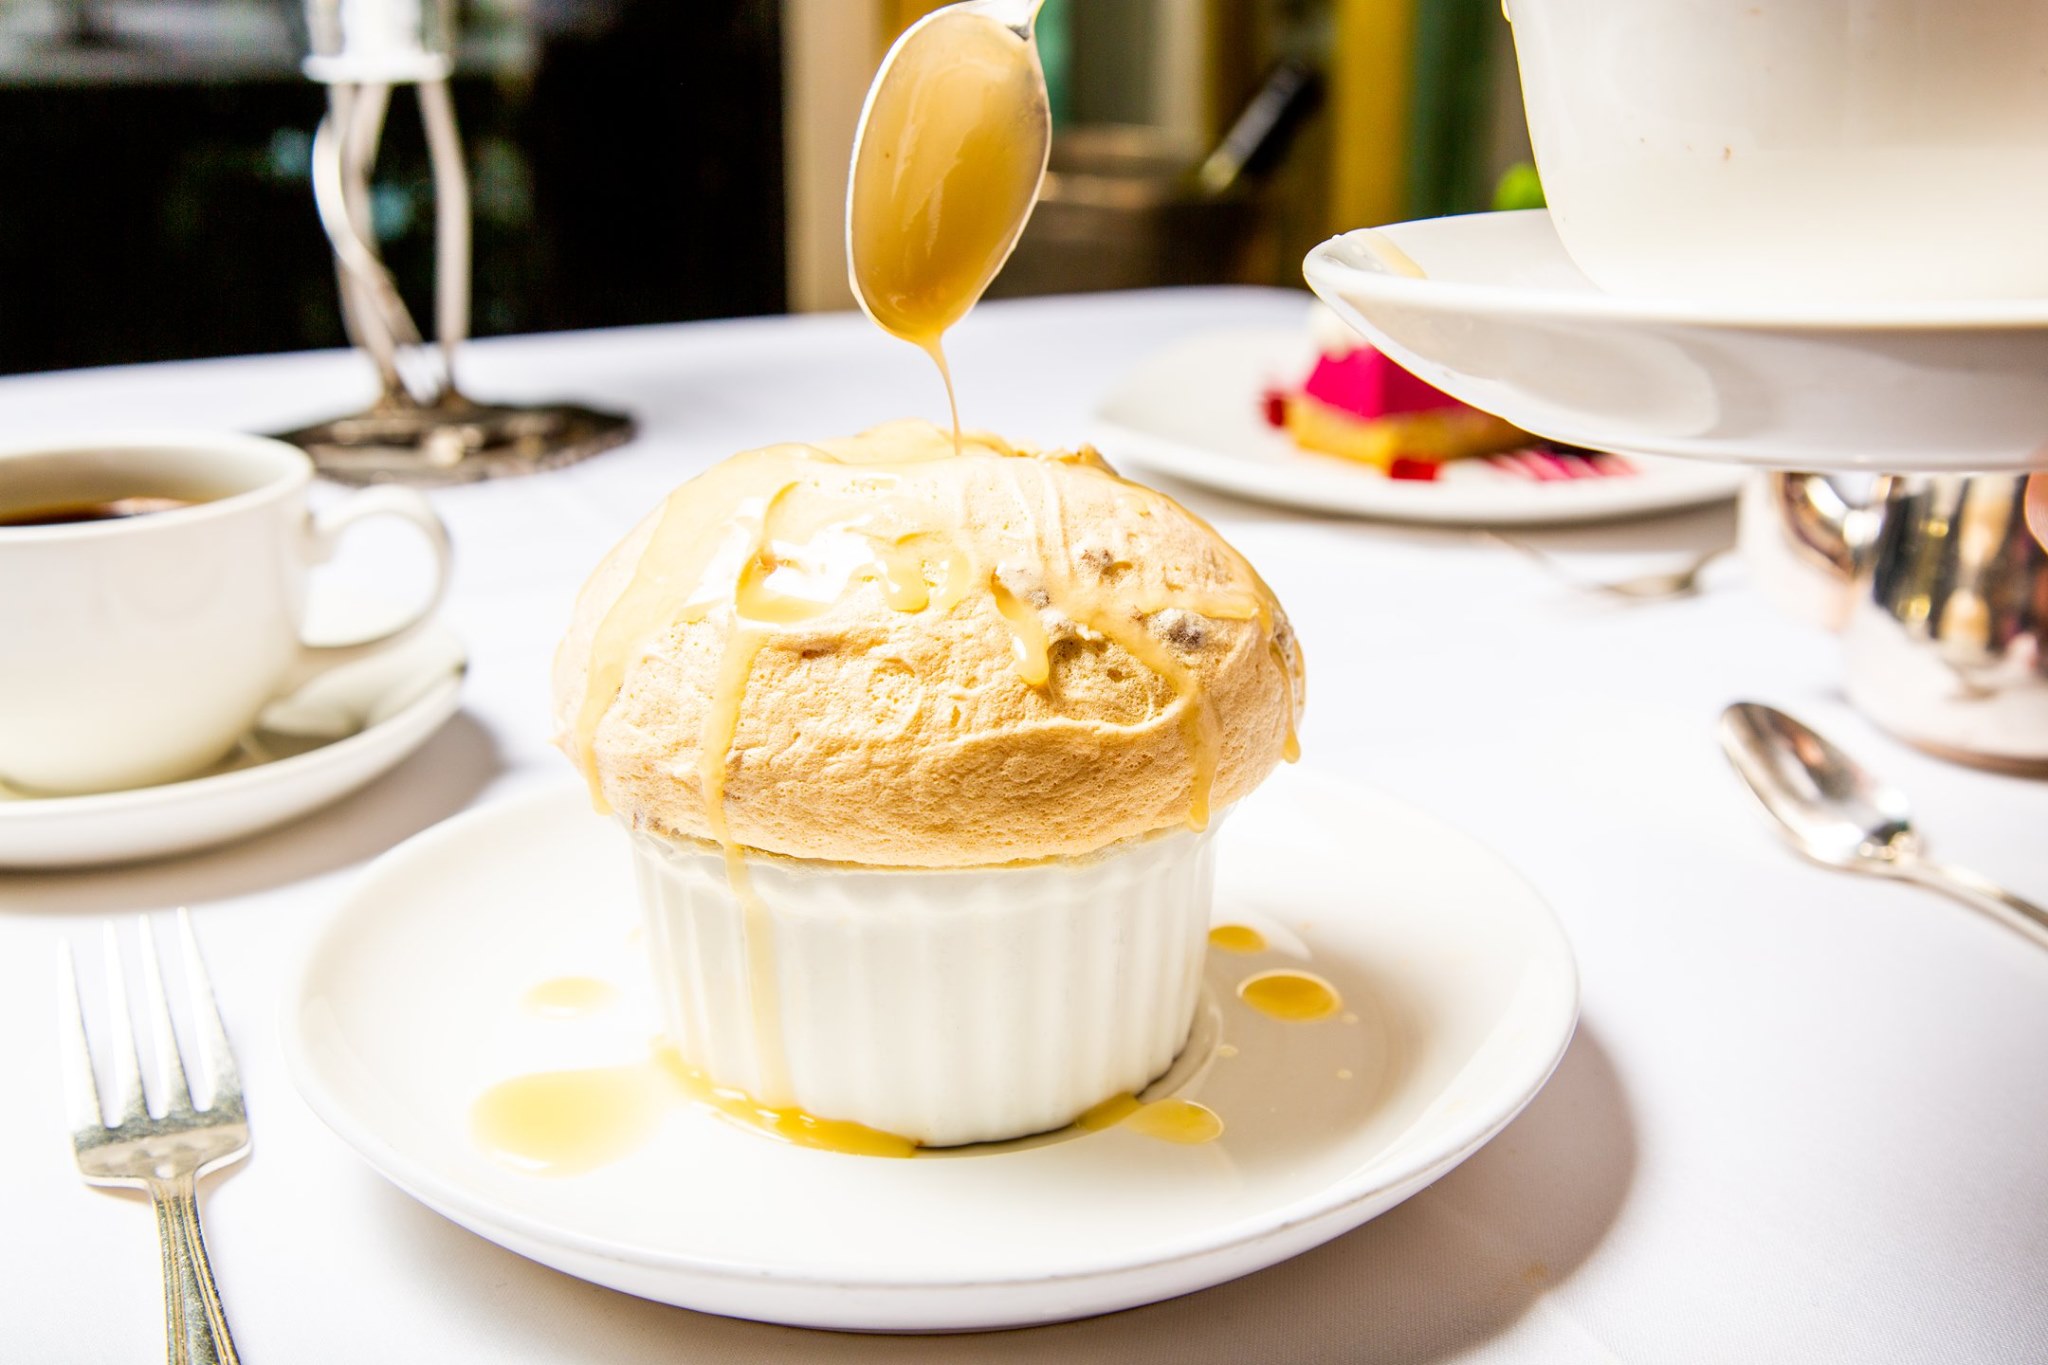 A bread pudding soufflé in a white ramekin on a white plate on a table covered in a white table cloth, with other dishes visible in the background.